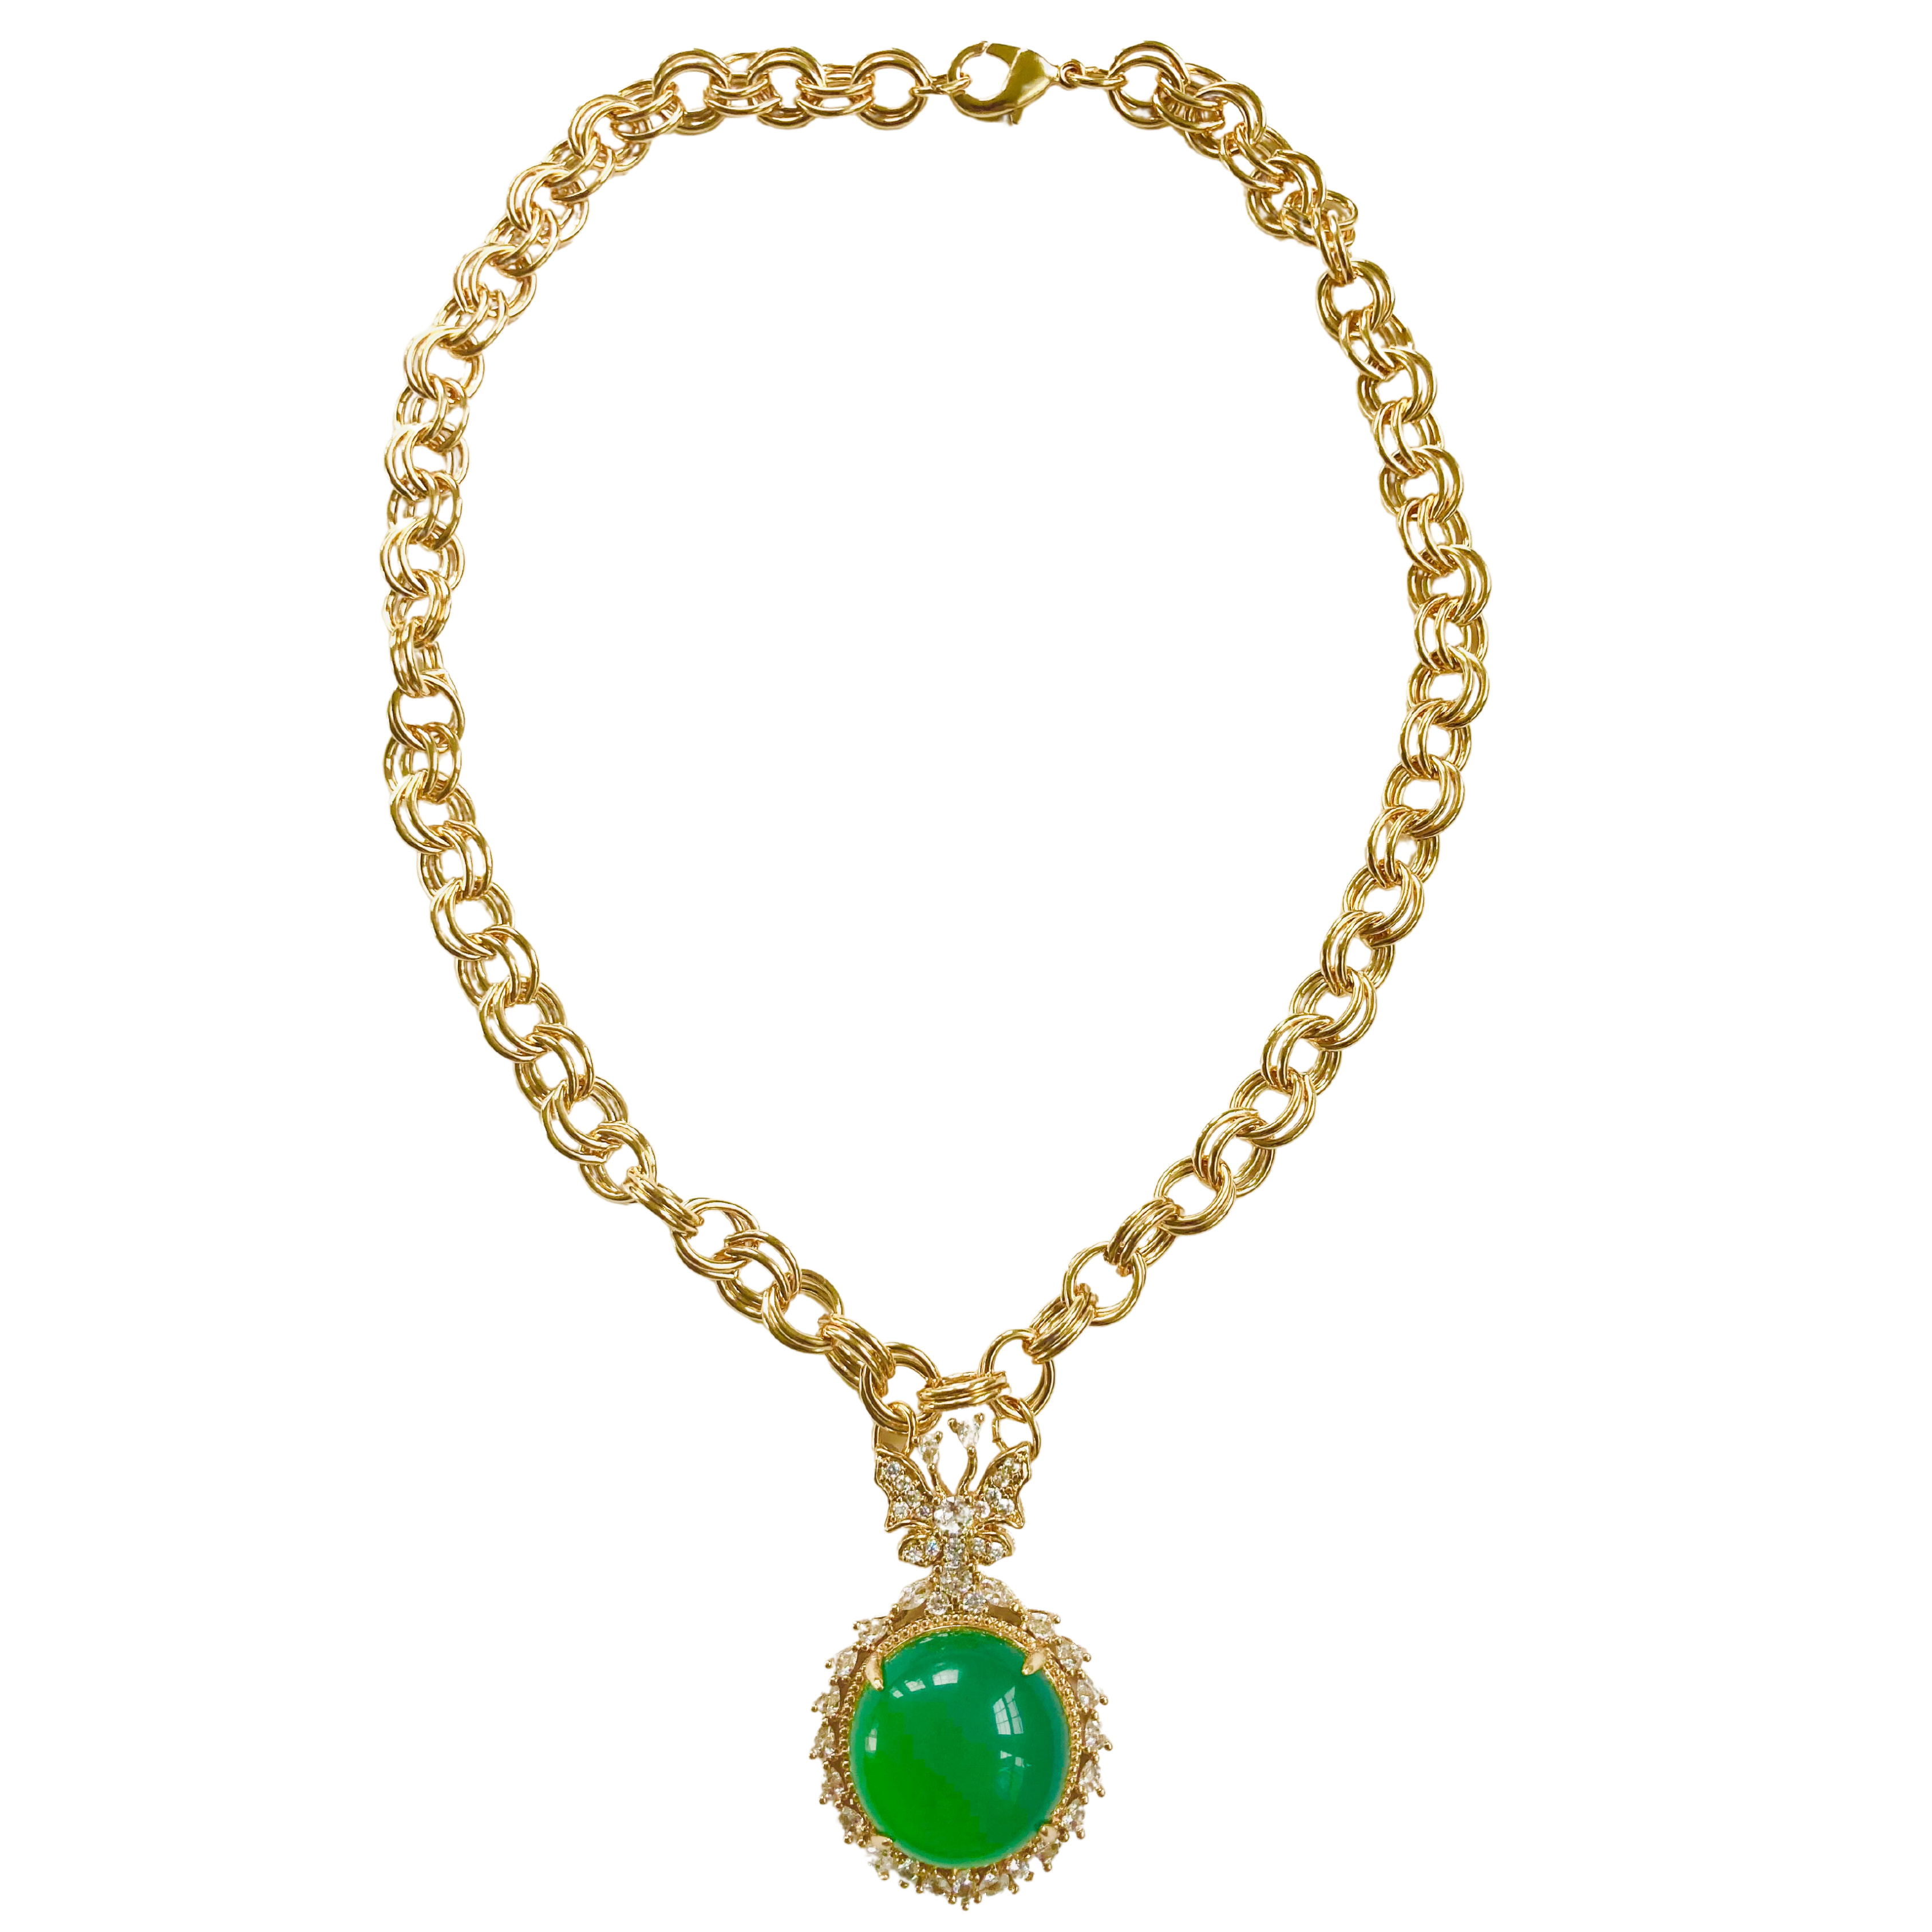 The Pink Reef Women's Green Imperial Jade Necklace